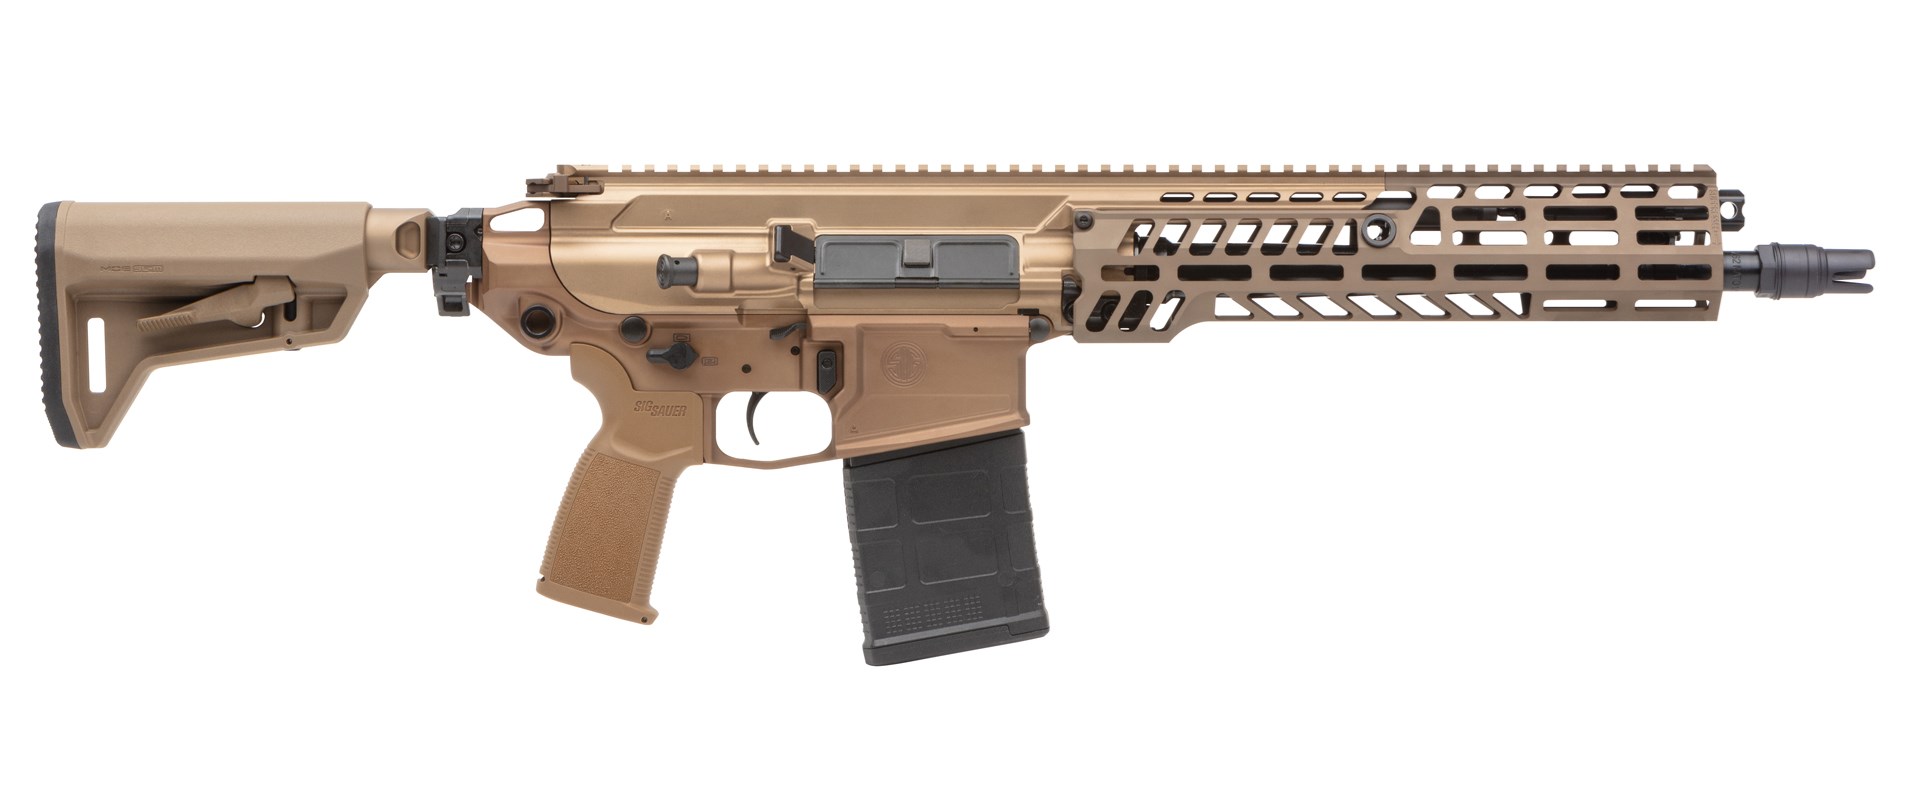 Right side of the SIG Sauer MCX-Spear short-barreled rifle.